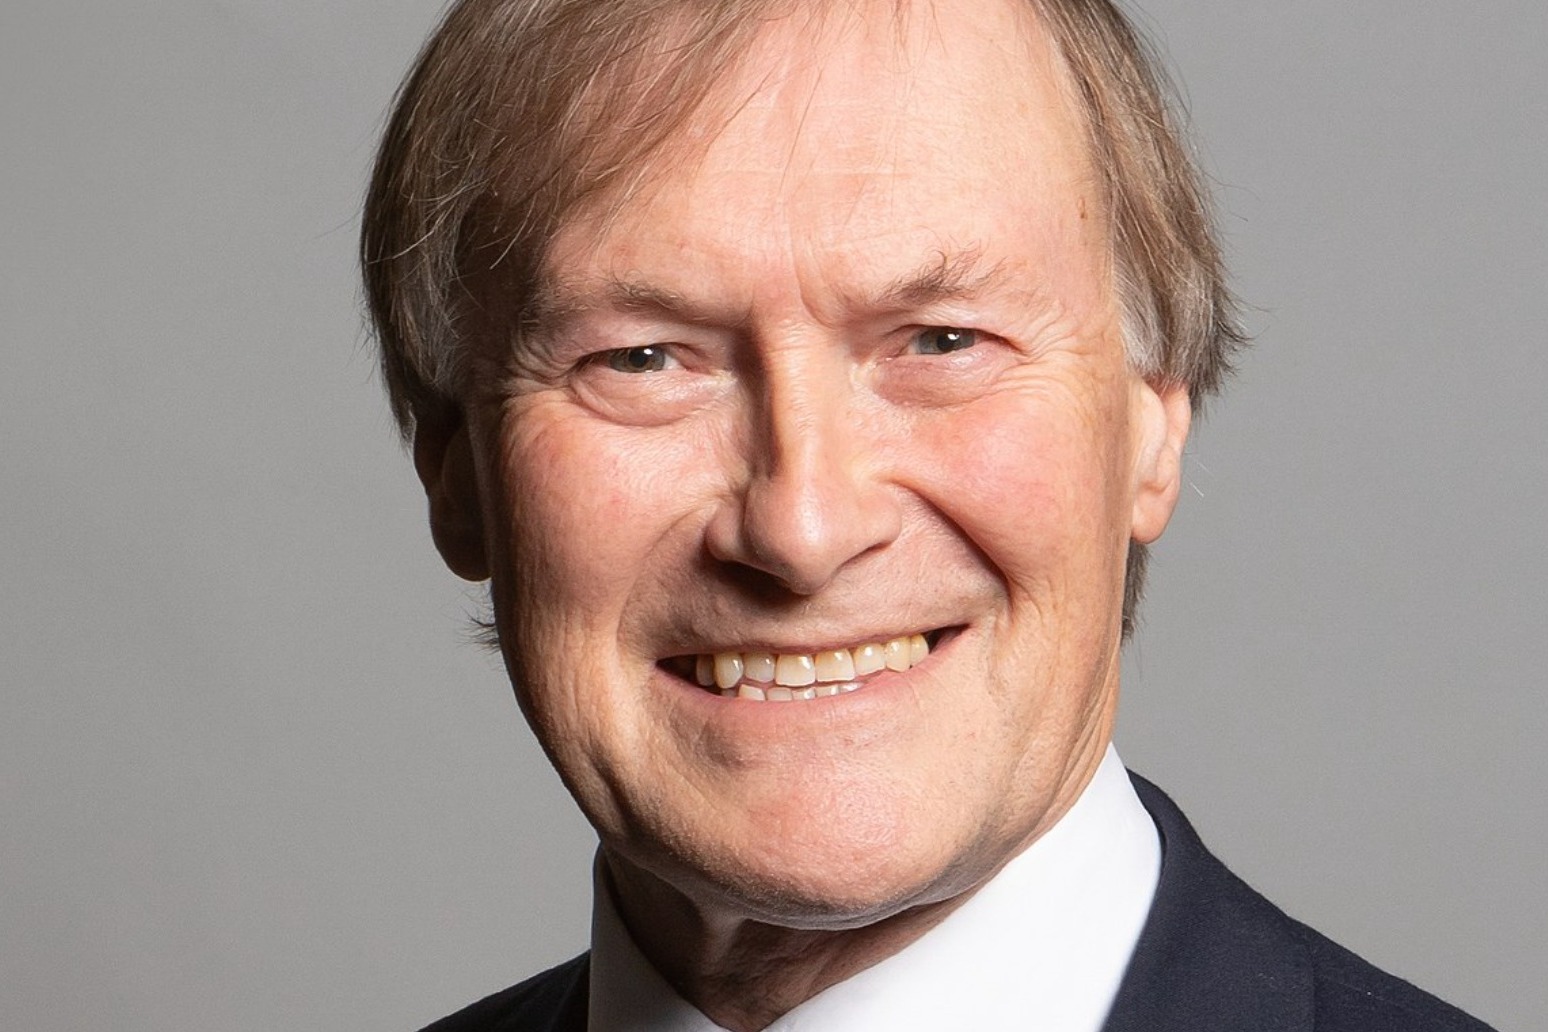 Sir David Amess killing: What we know so far about the suspect 